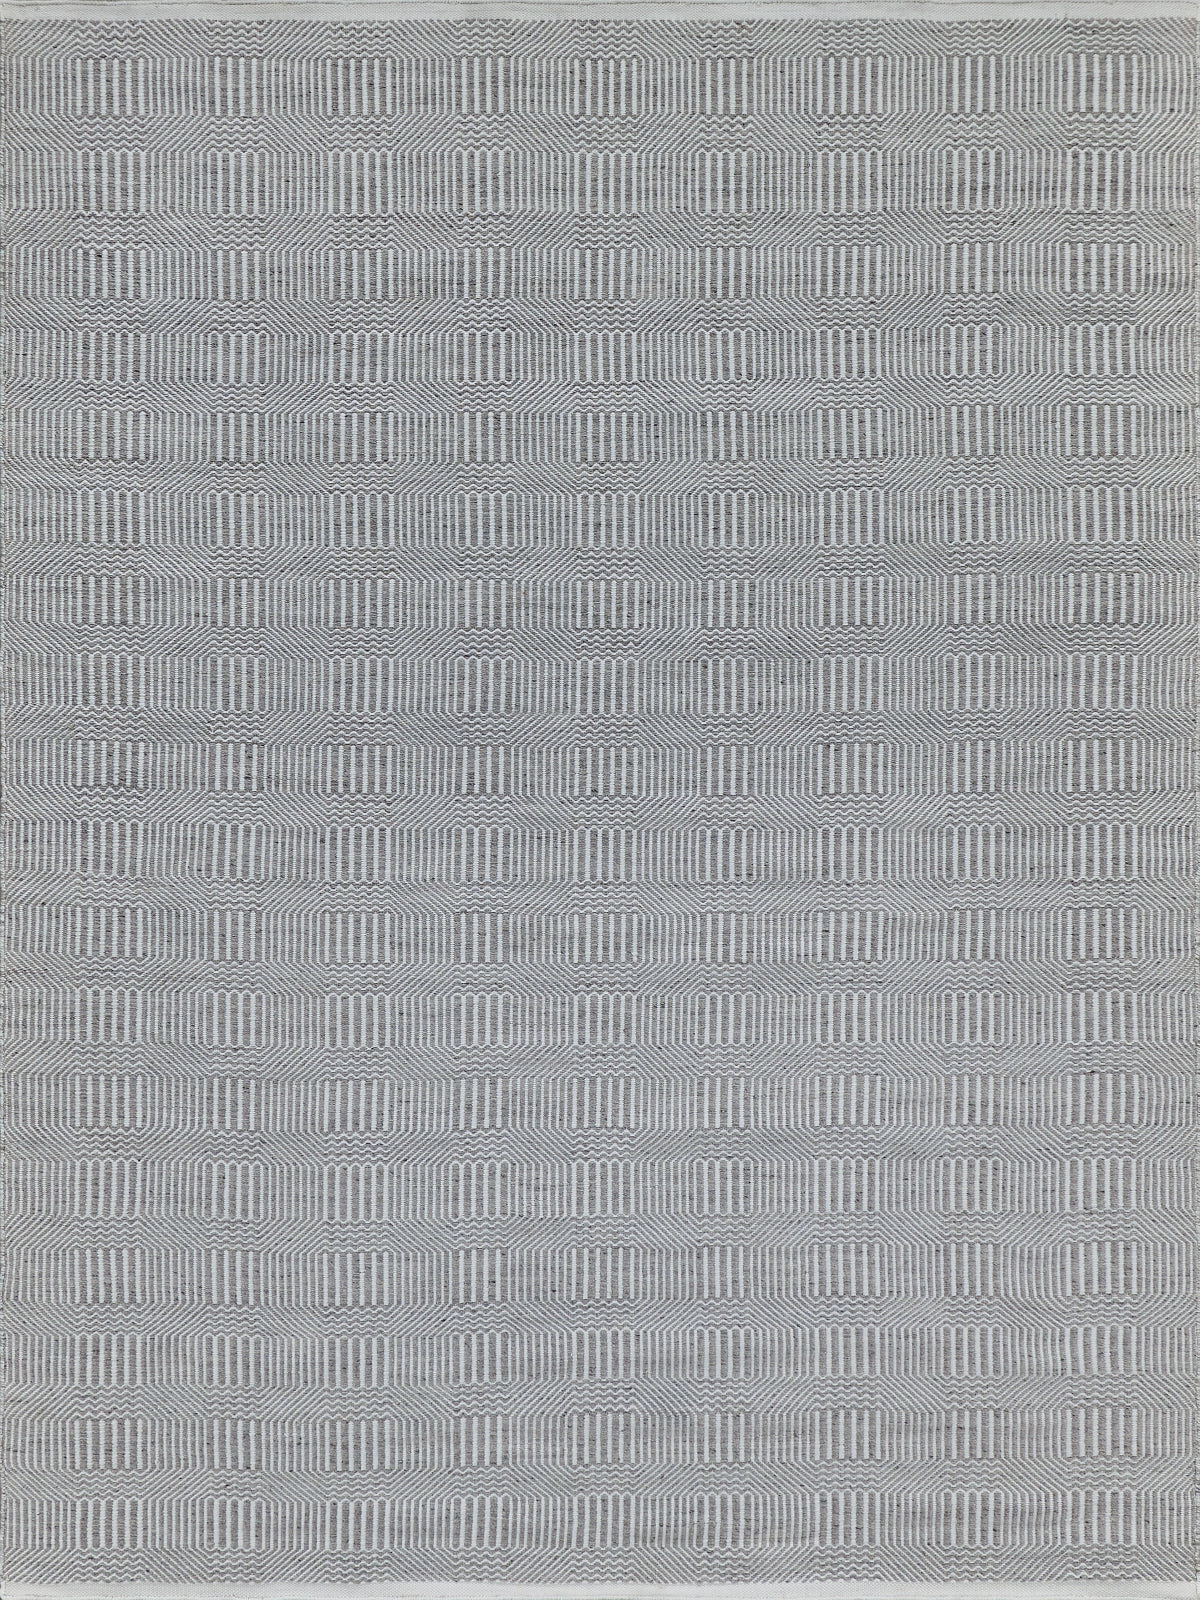 Exquisite Rugs Naples 4882 Ivory/Gray Area Rug